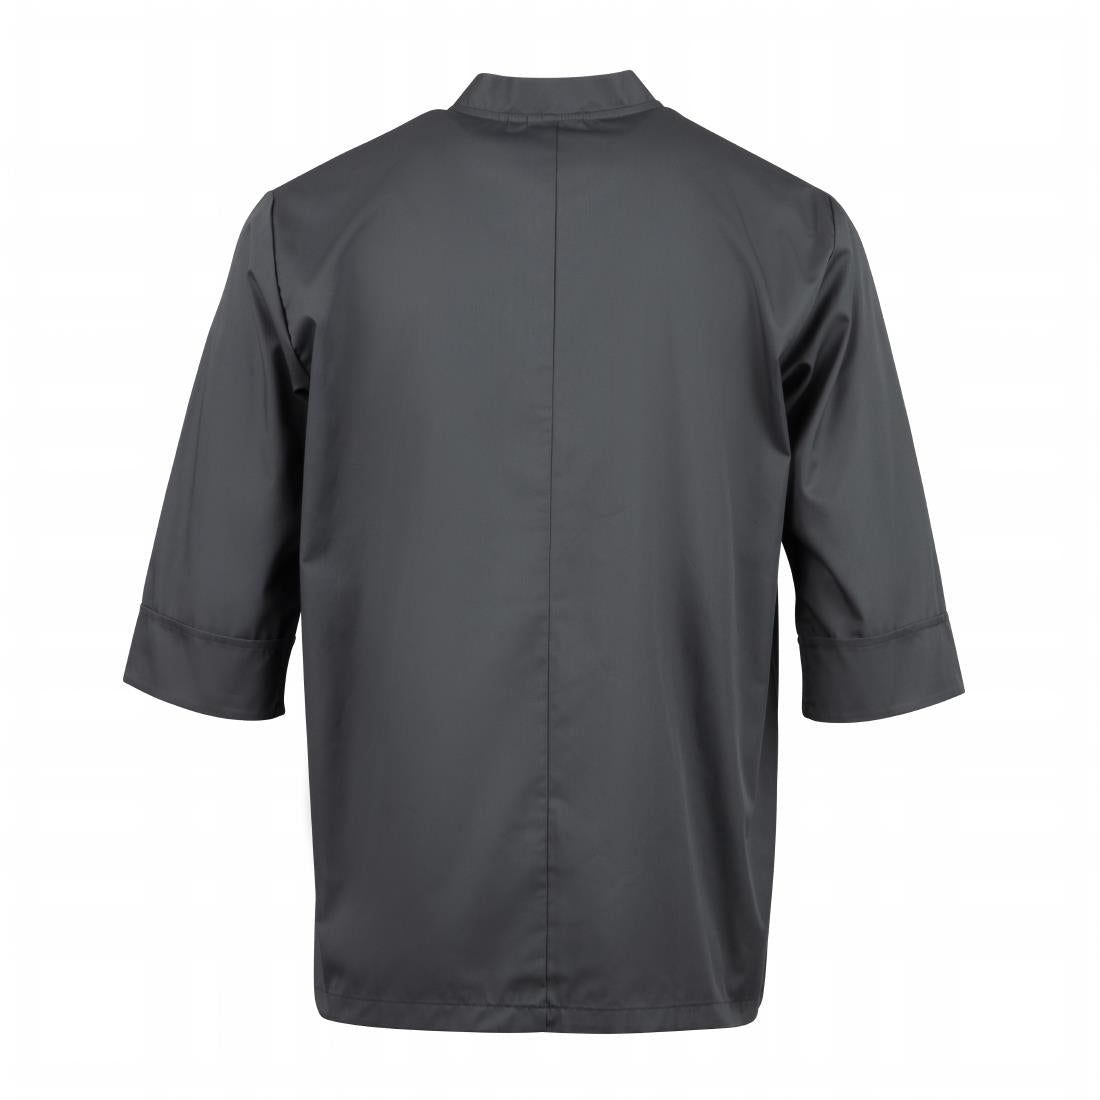 A934-XXL Chef Works Unisex Chefs Jacket Grey 2XL JD Catering Equipment Solutions Ltd